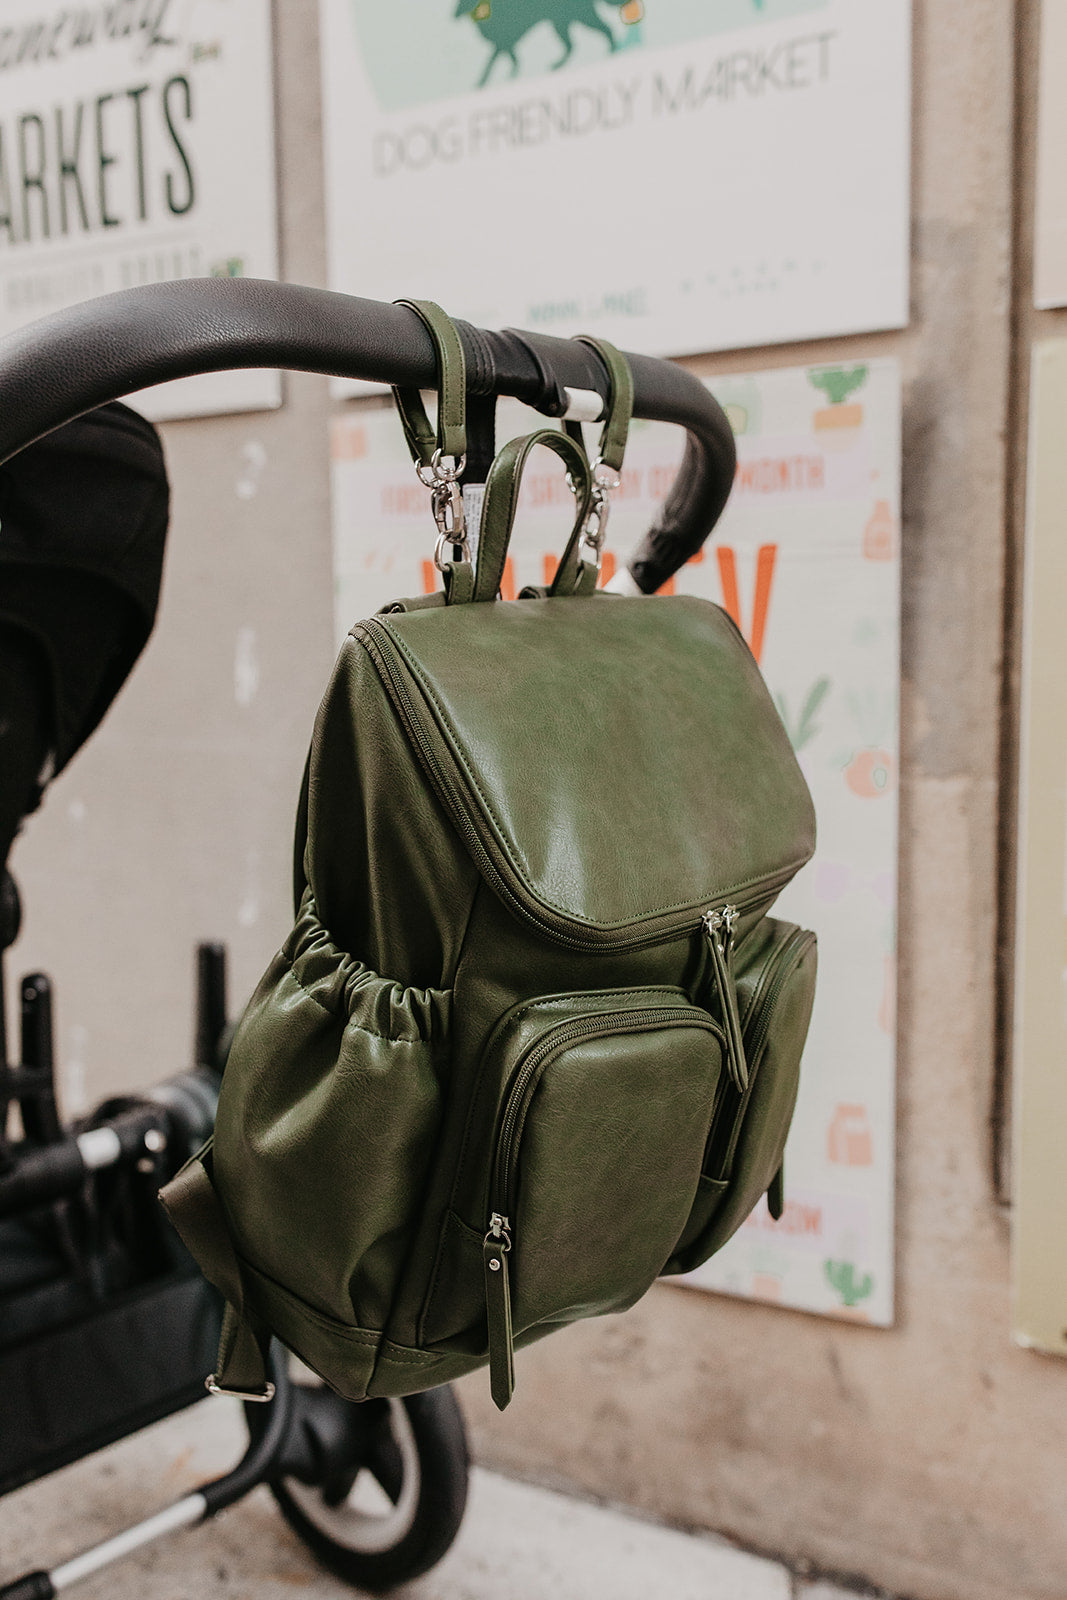 OiOi Nappy Backpack - Olive